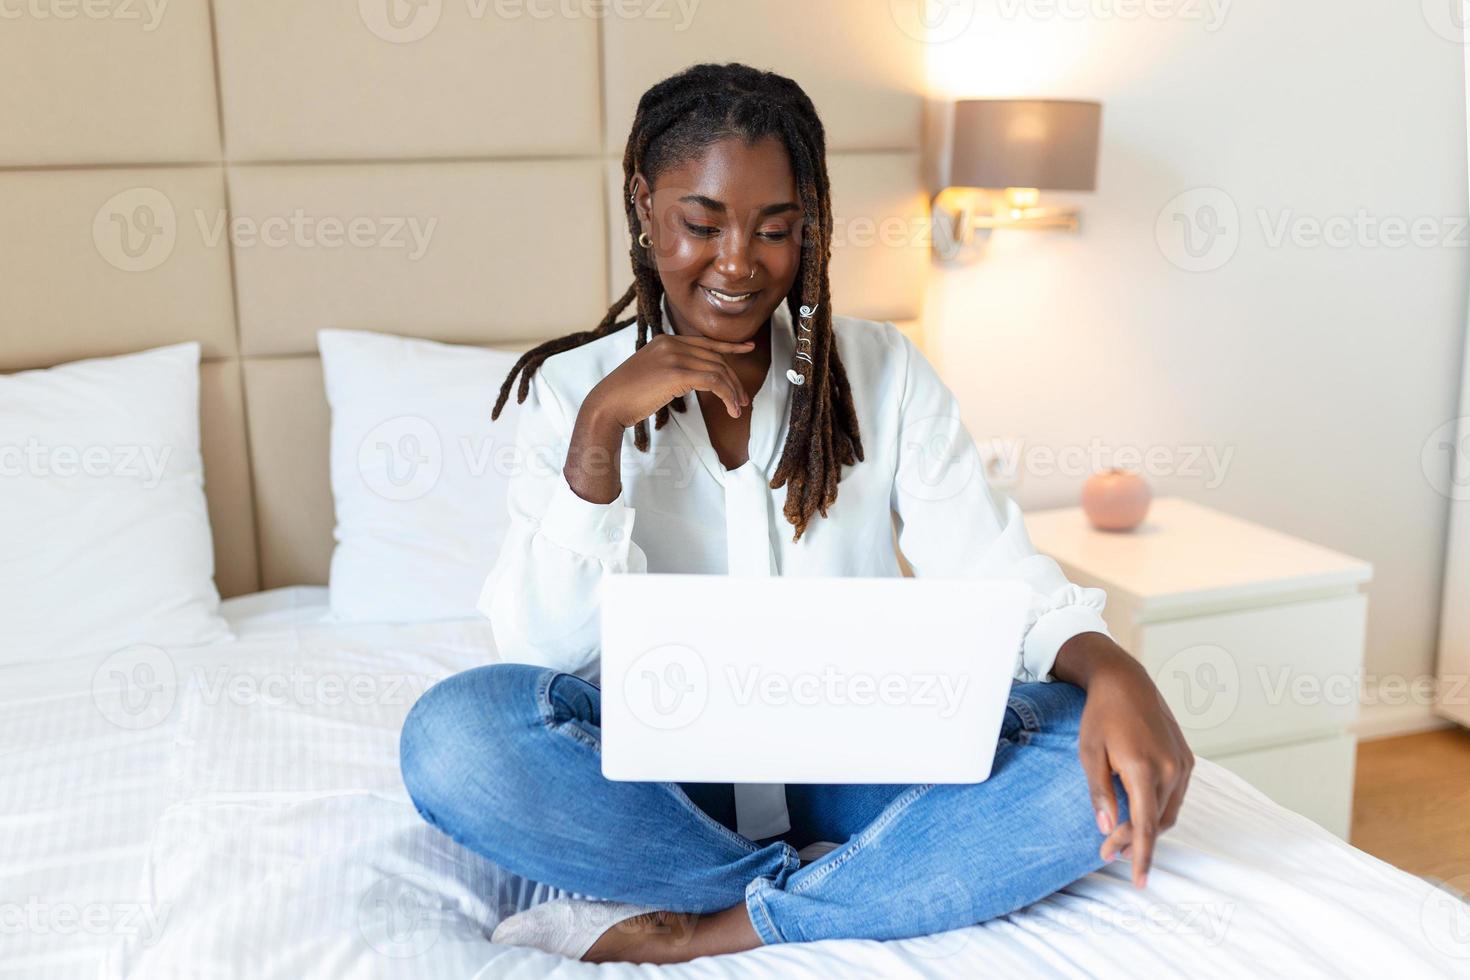 Attractive African woman in white shirt using laptop and smiling at morning. Video chat and freelance working from home concept of beautiful young woman with laptop in bed photo